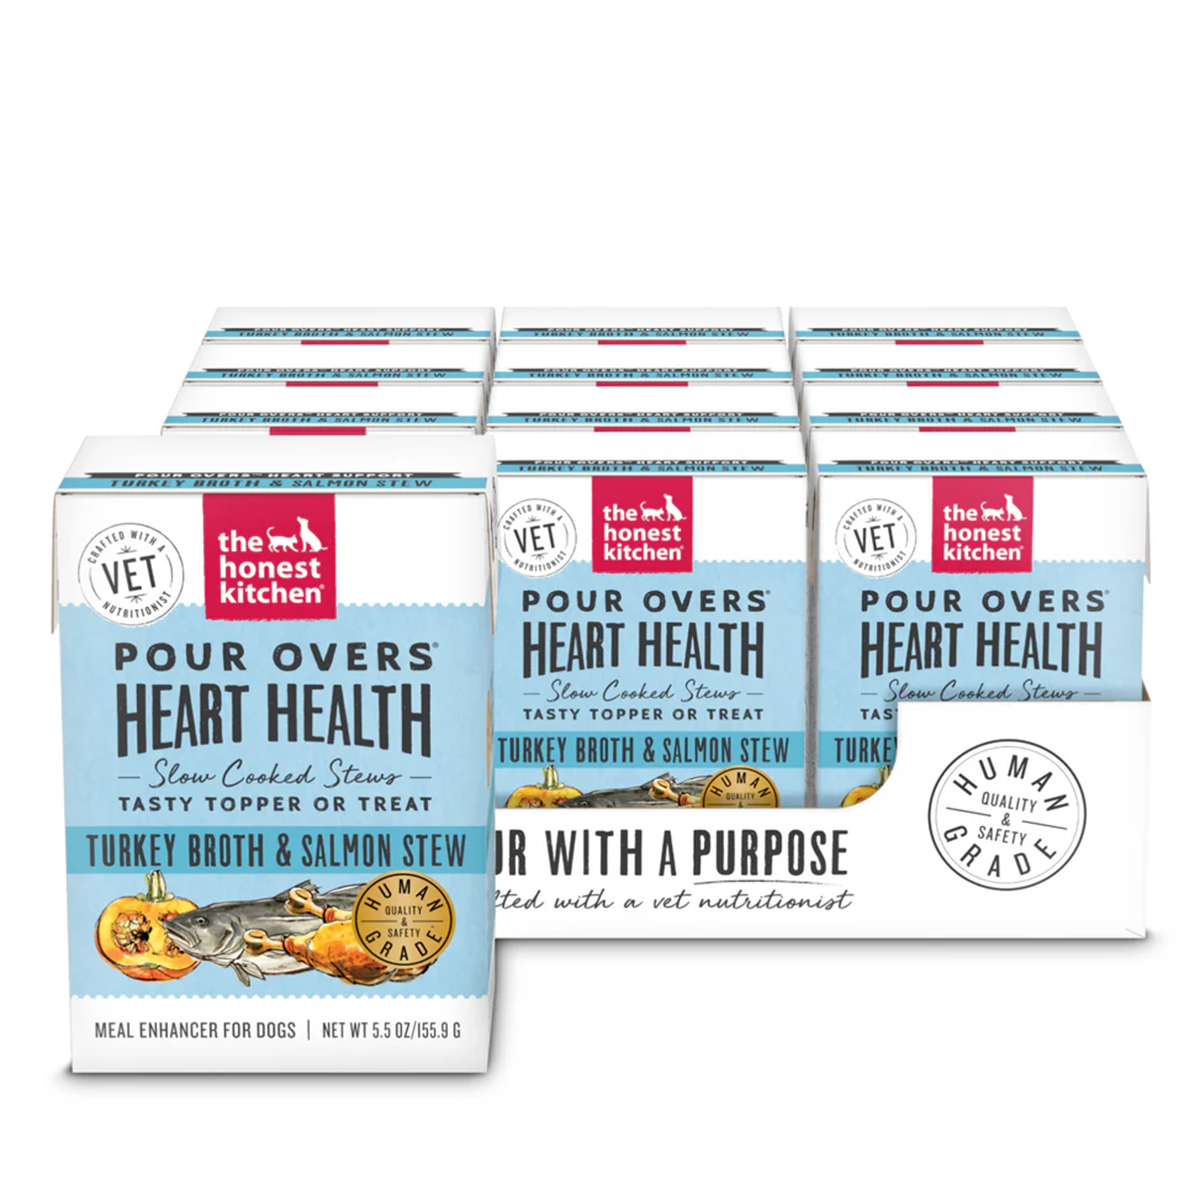 honest-kitchen-pour-overs-heart-health-dog-food-topper-turkey-broth-salmon-stew